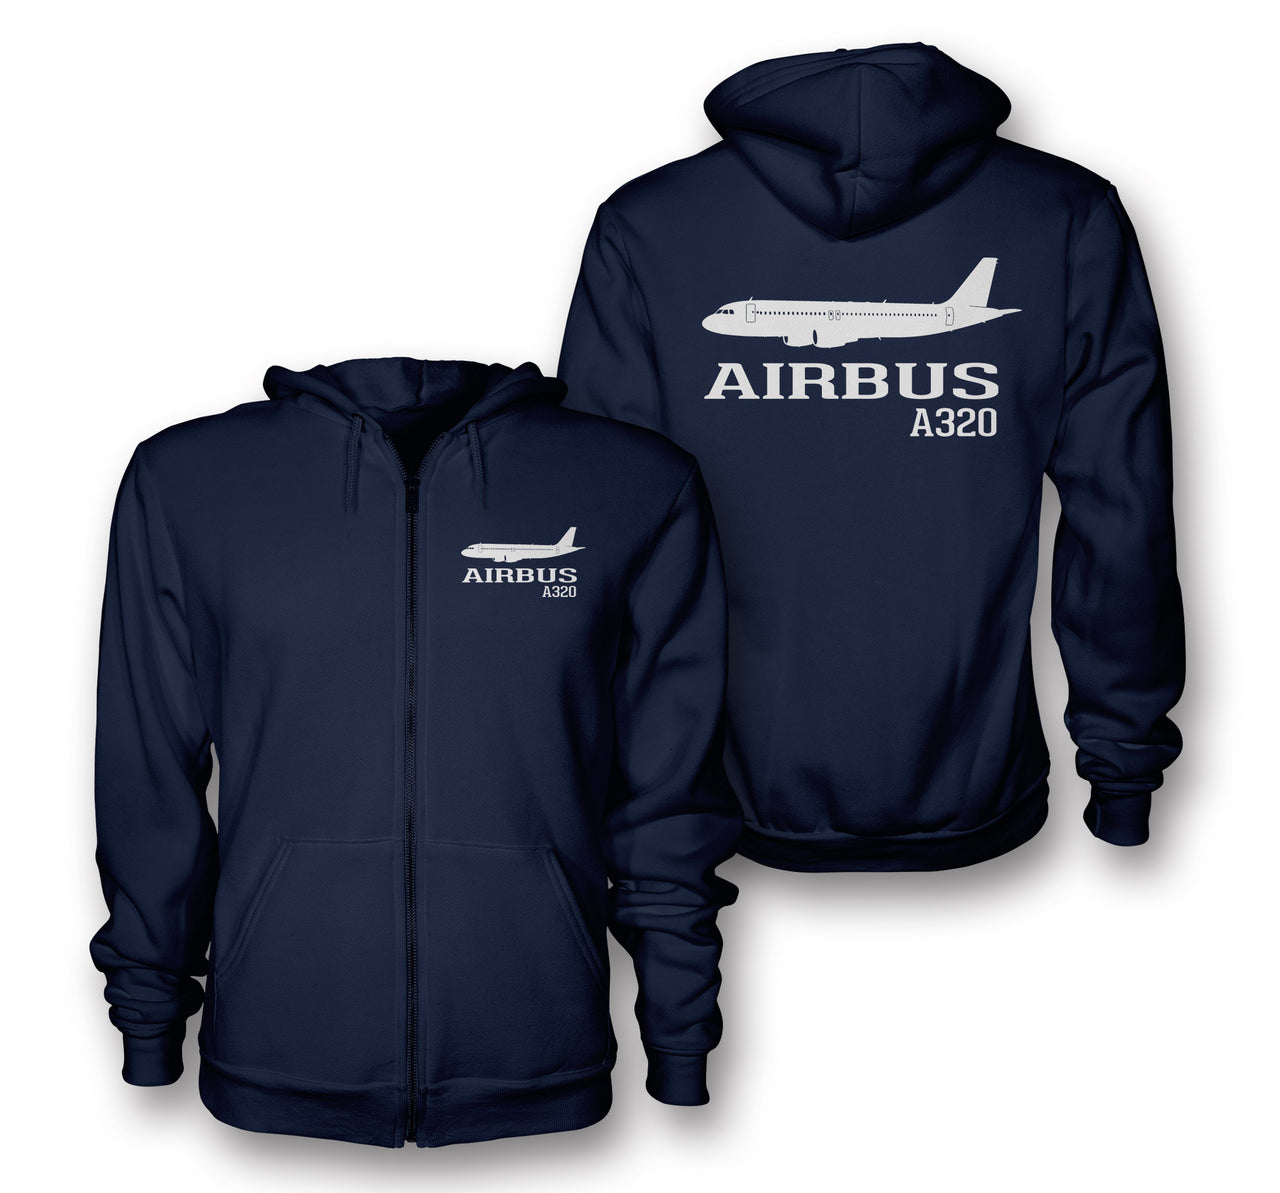 Airbus A320 Printed & Designed Zipped Hoodies